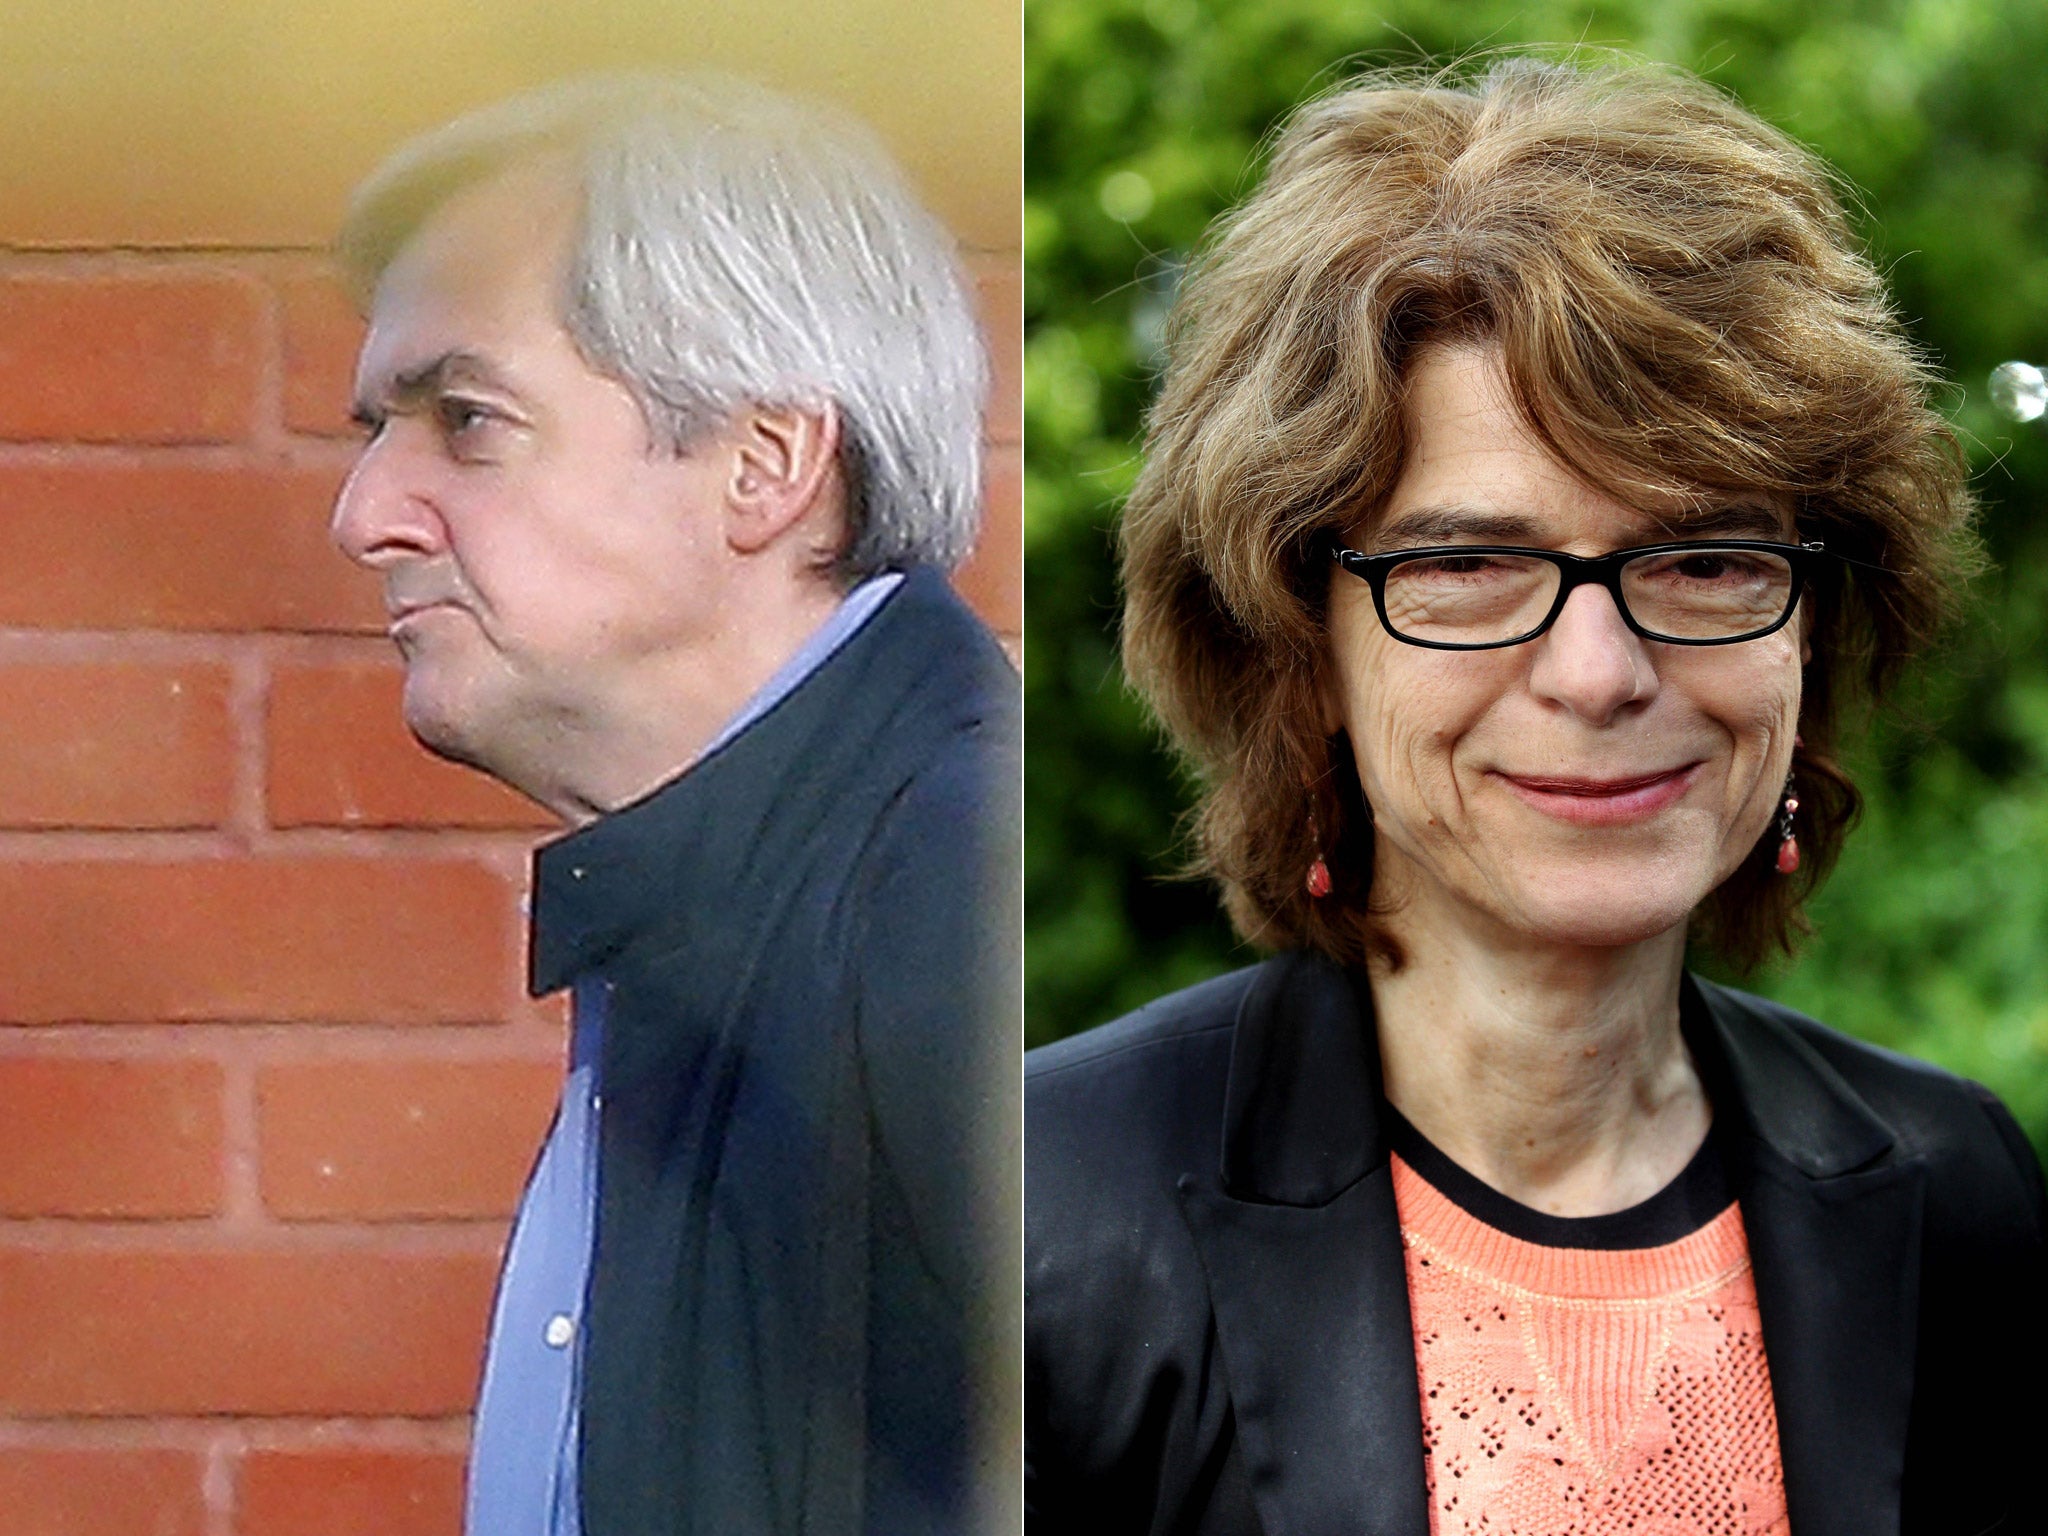 Chris Huhne (right) and Vicky Pryce return to their homes